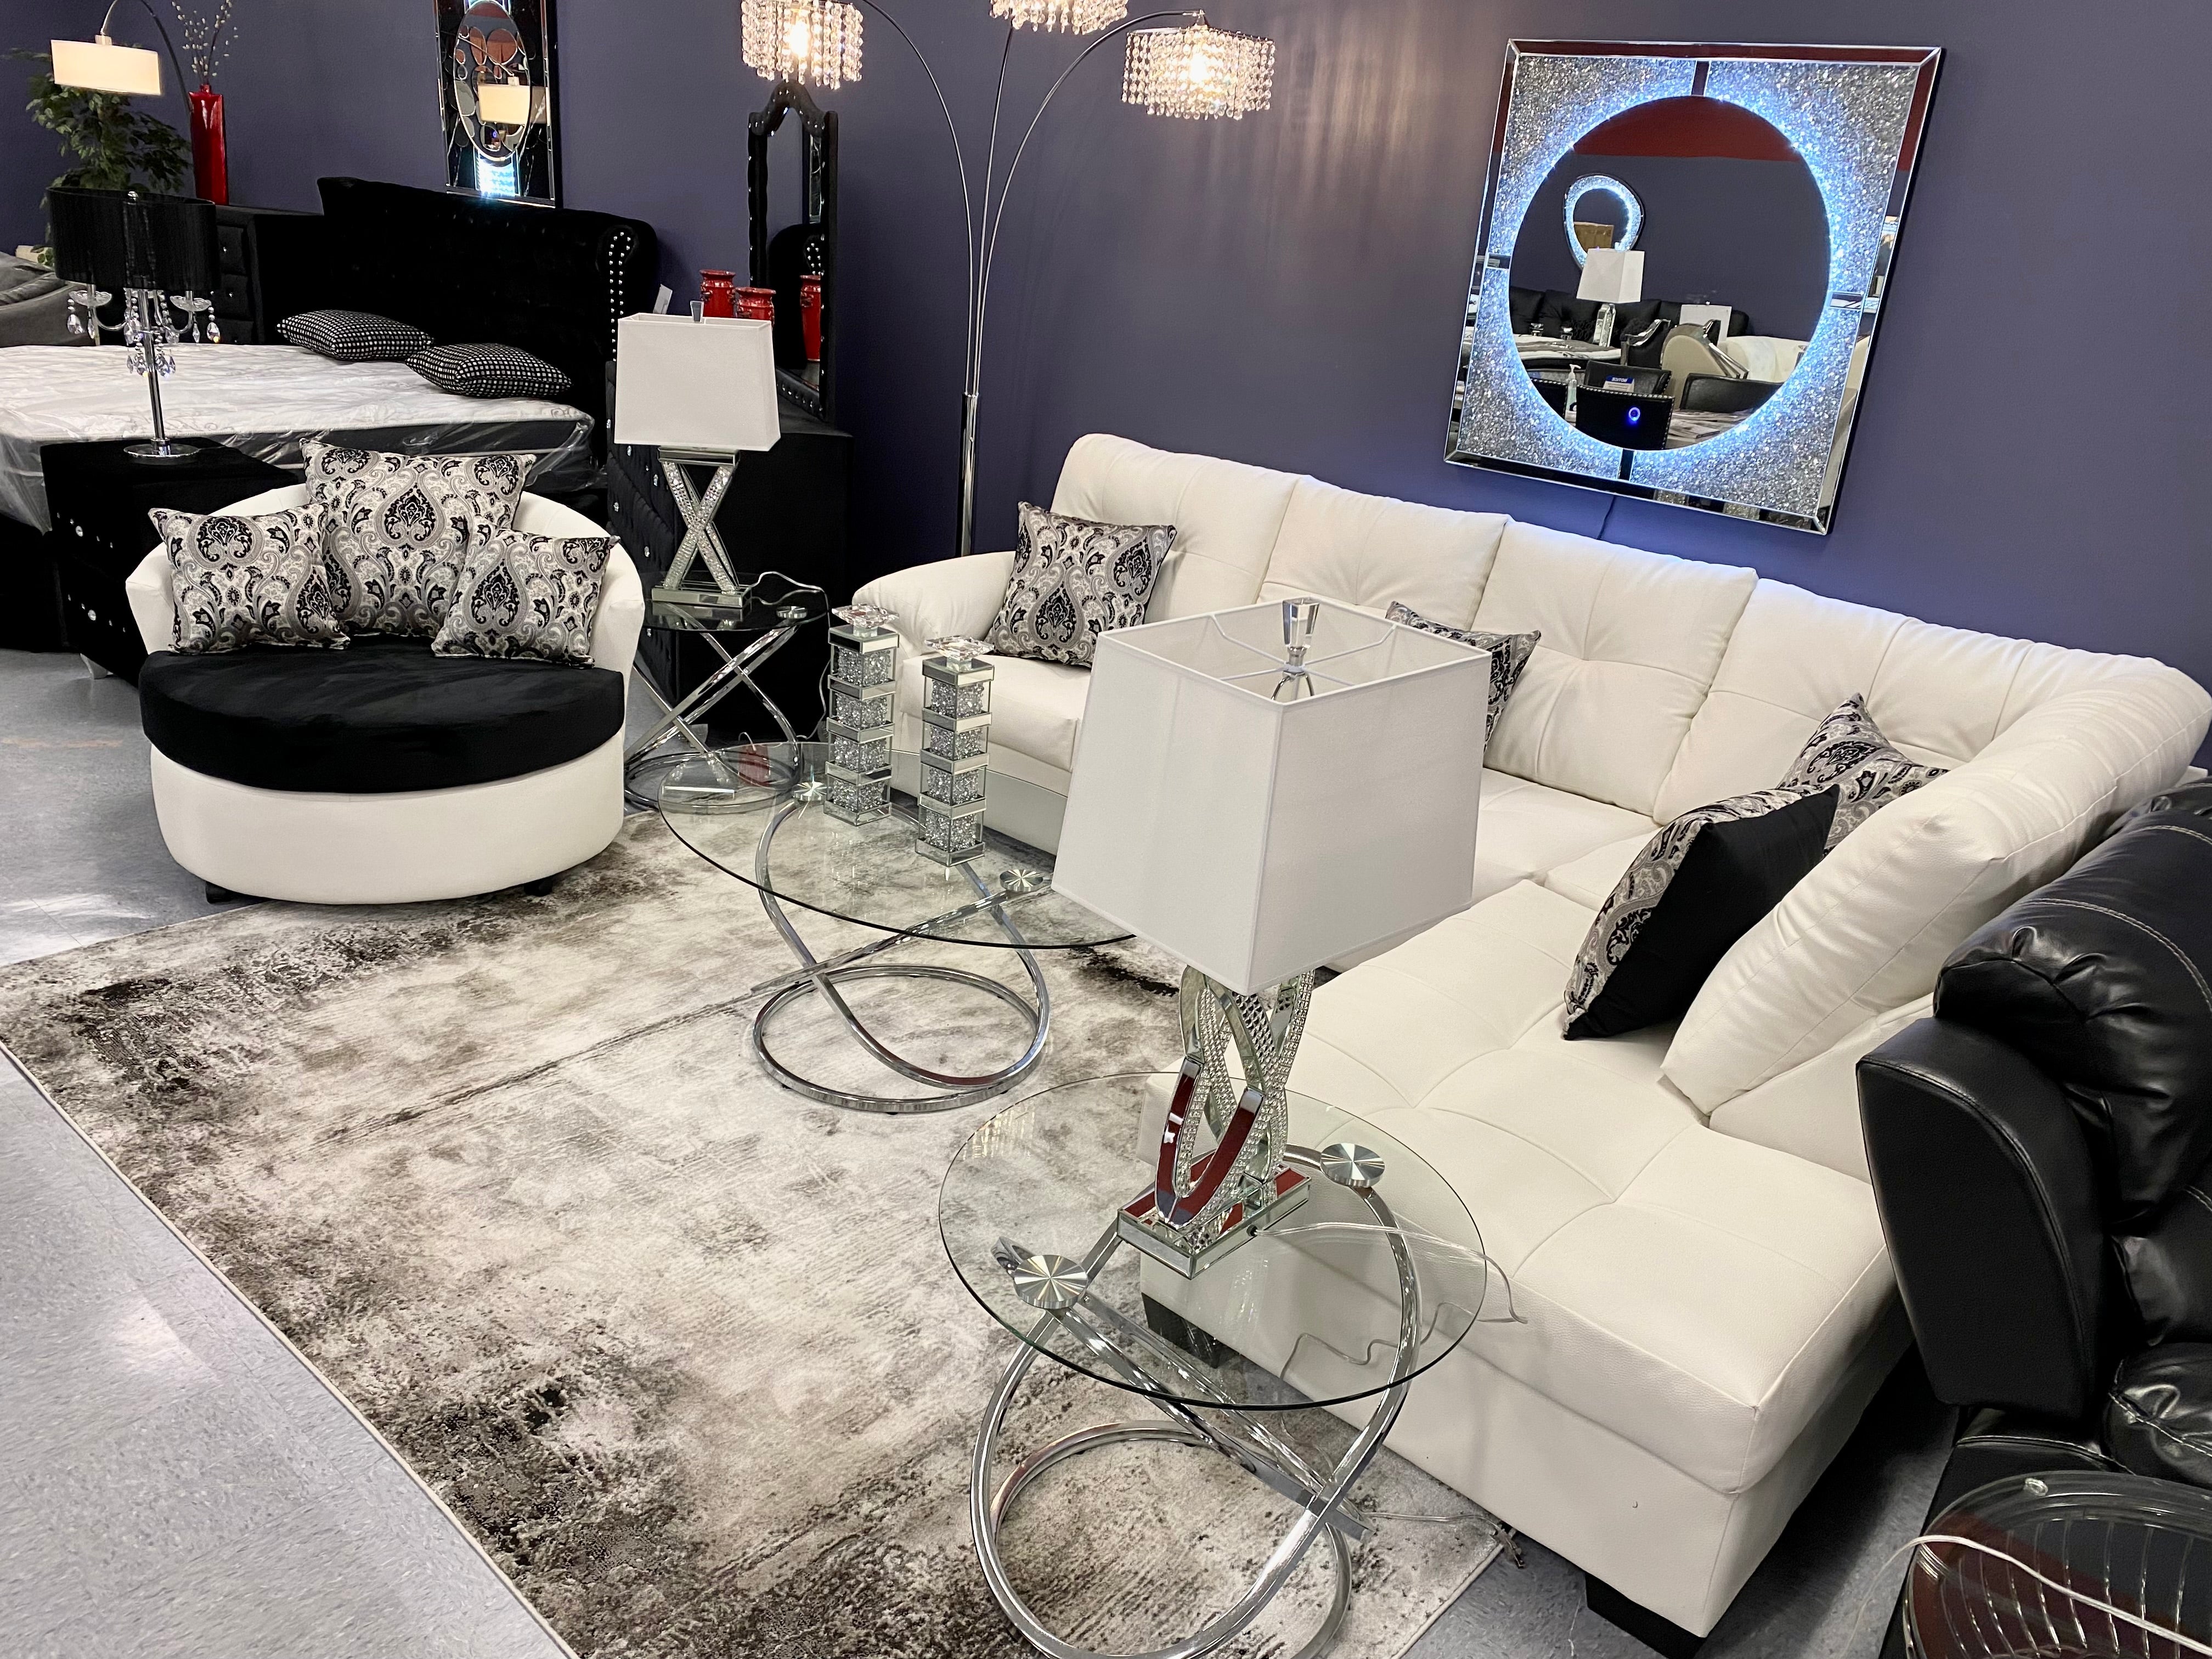 CRISTAL ROYALE OXFORD WHITE LEATHER Upholstered Sectional Sofa in ** Available In Over 500 in house Colors and Patterns to Choose From, ** Custom Made To Order ** Design It Your Way